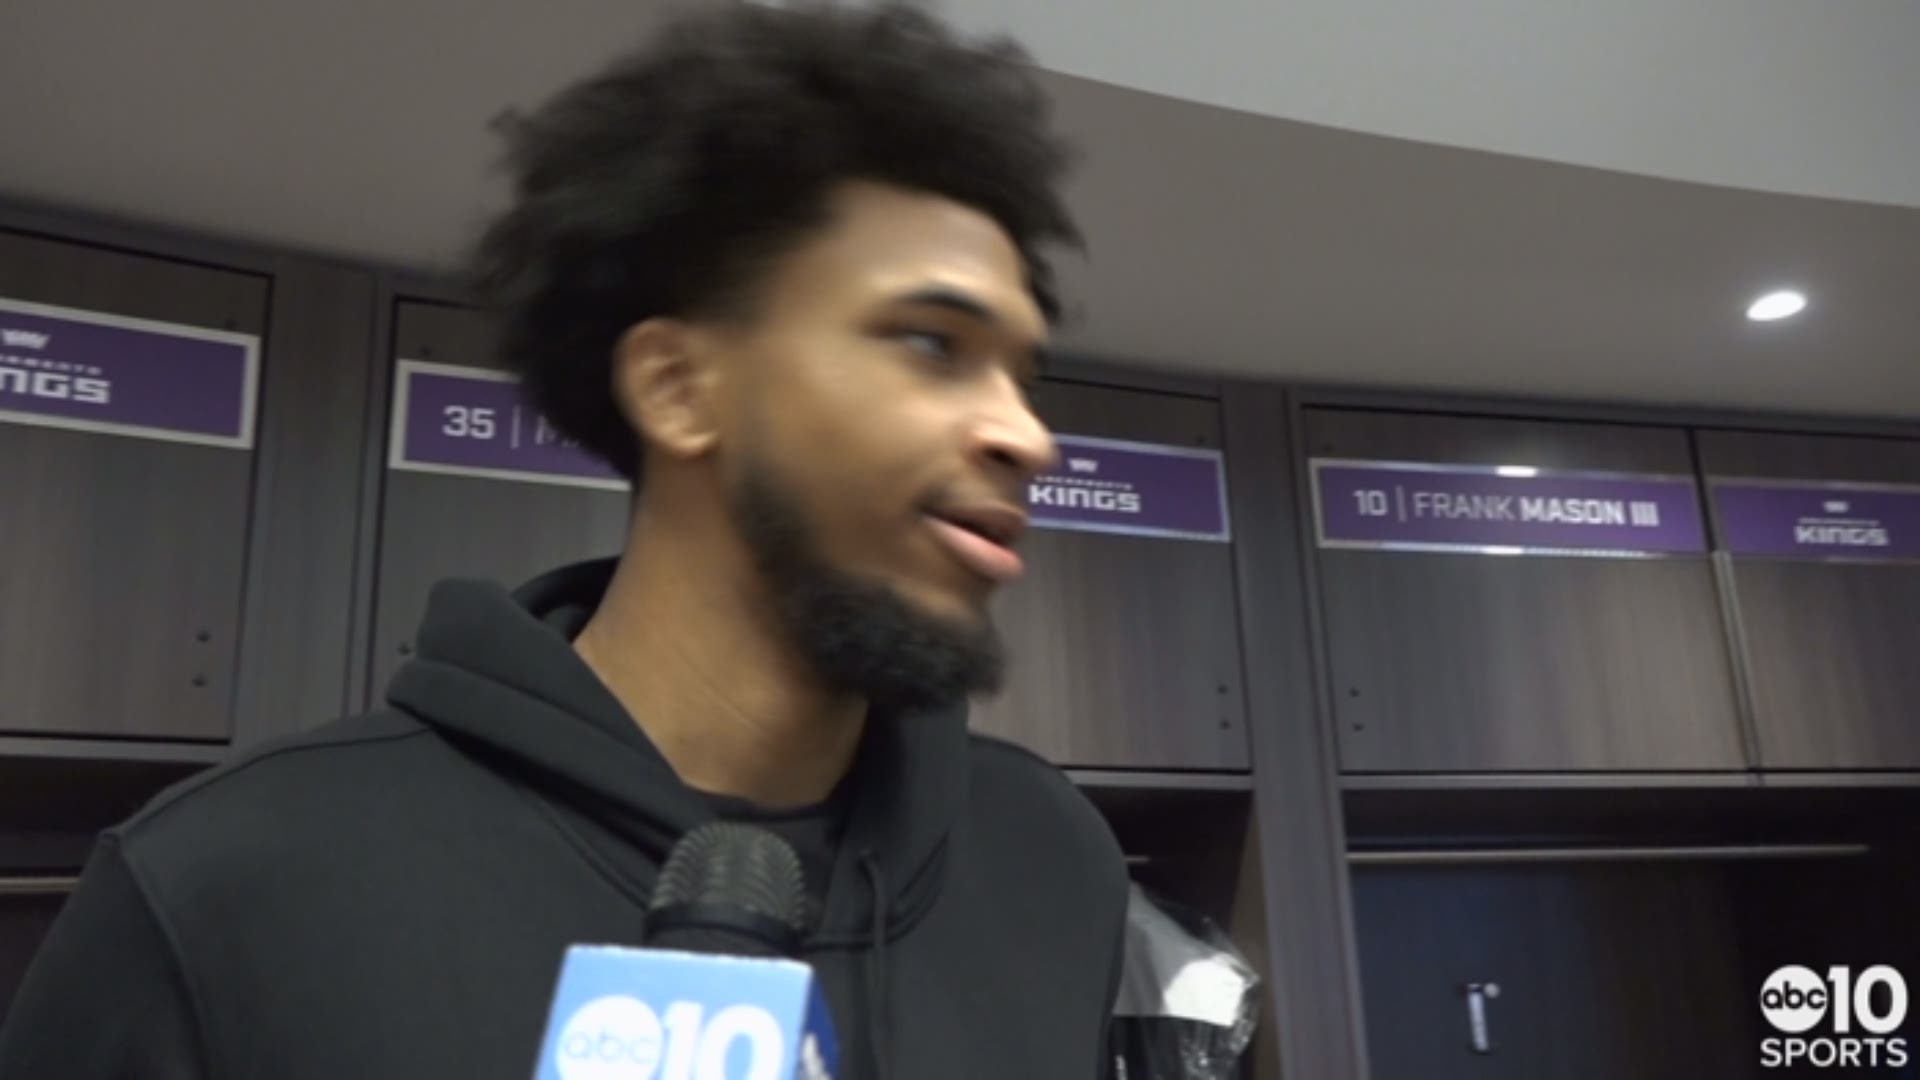 Kings rookie Marvin Bagley III talks about Wednesday's win over the Atlanta Hawks, the career night from Harry Giles, and his upcoming appearance in Charlotte at All-Star Weekend's Rising Stars Challenge.